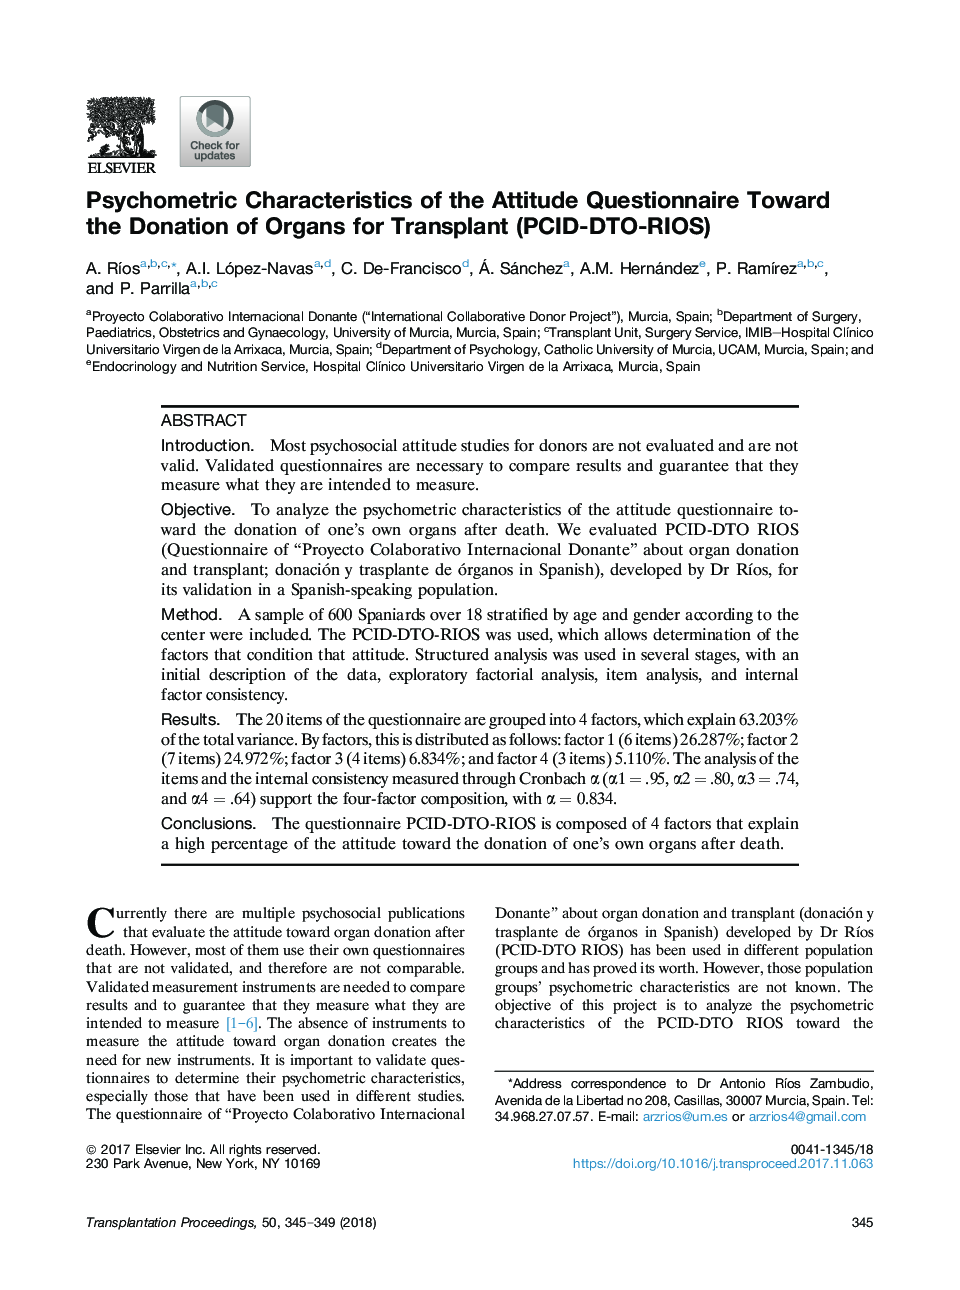 Psychometric Characteristics of the Attitude Questionnaire Toward the Donation of Organs for Transplant (PCID-DTO-RIOS)